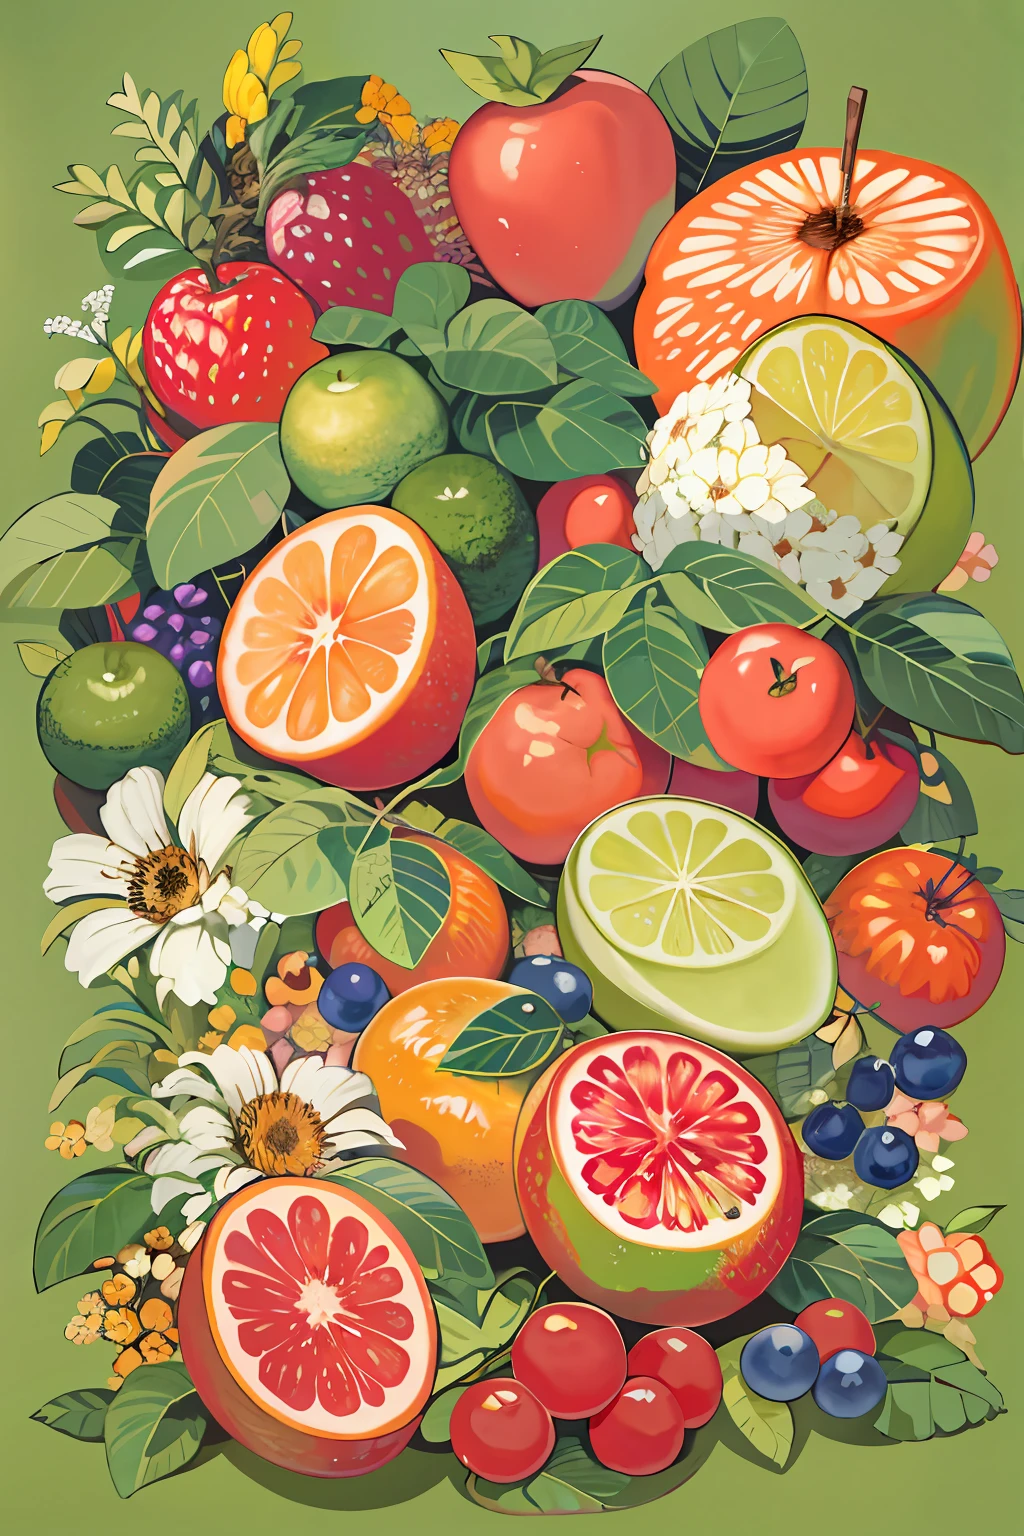 There is a painting of a bunch of fruits on the table, fruit and flowers, full-colour illustration, author：John Wernachot, made of fruit and flowers, made of flowers and fruit, Fruits, full of colour w 1024, full color digital illustration, author：Richard Mayhew, offcial art, in gouache detailed paintings, courful illustration